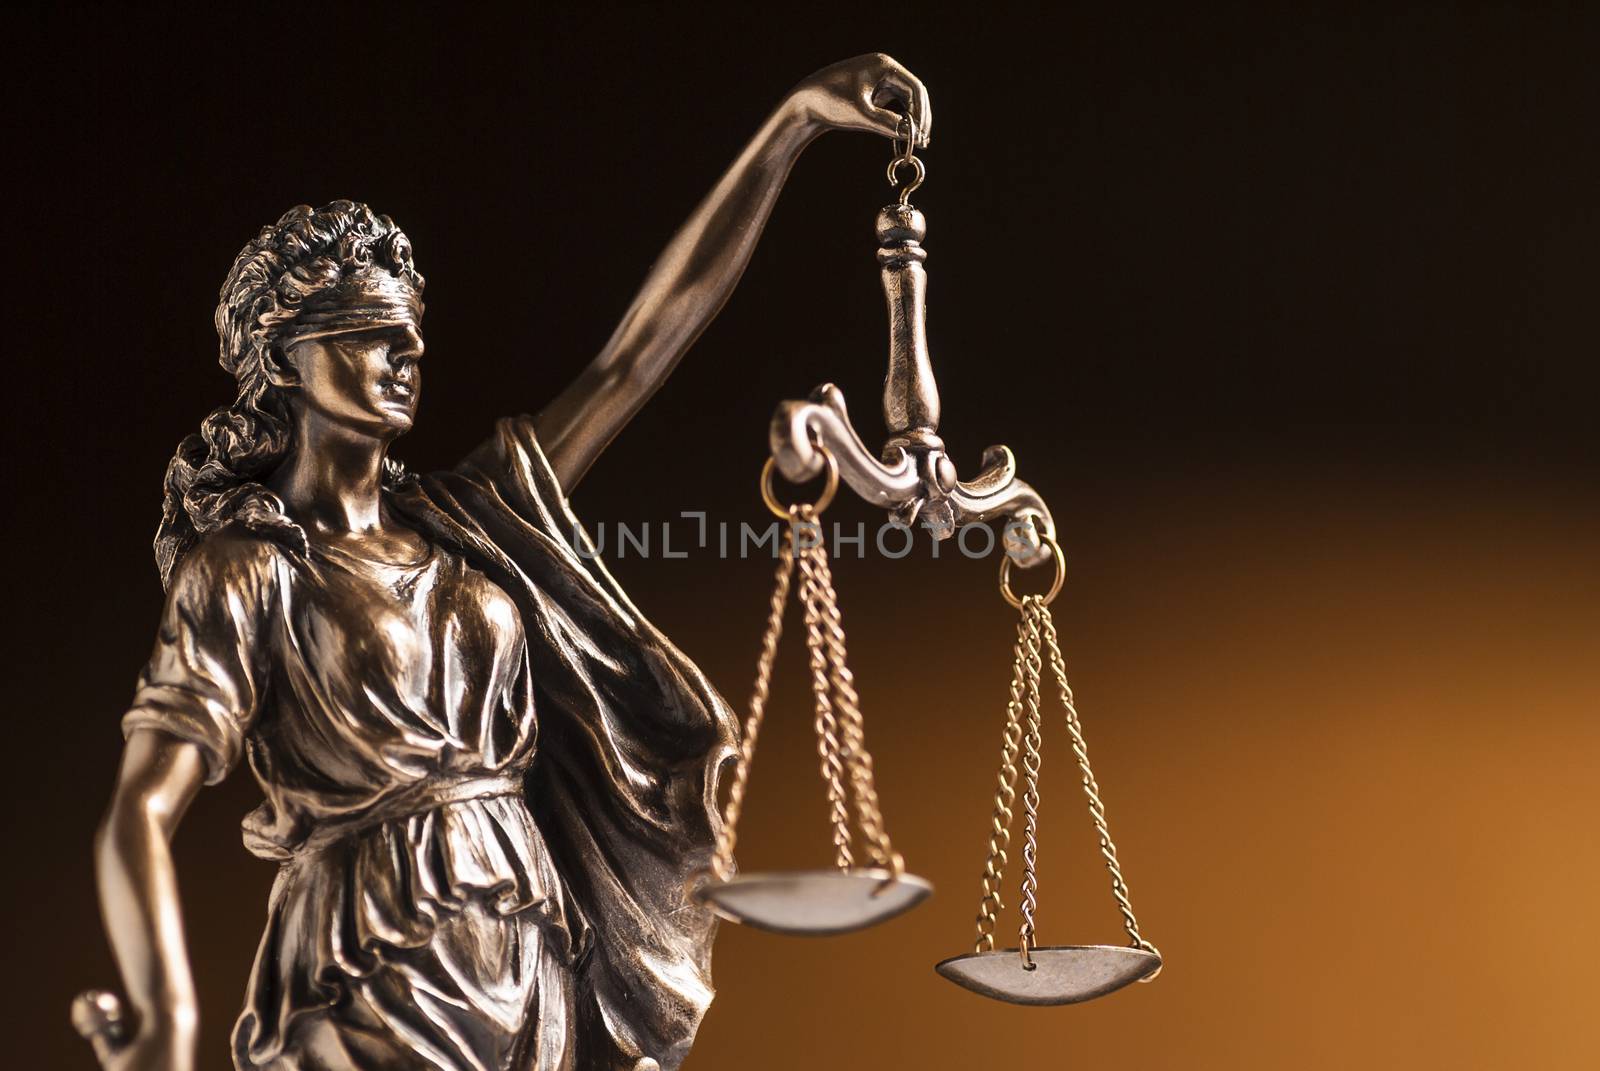 A blindfolded bronze statue of Justice holding up the scales or law and order in a close up partial view on a brown background with copy space